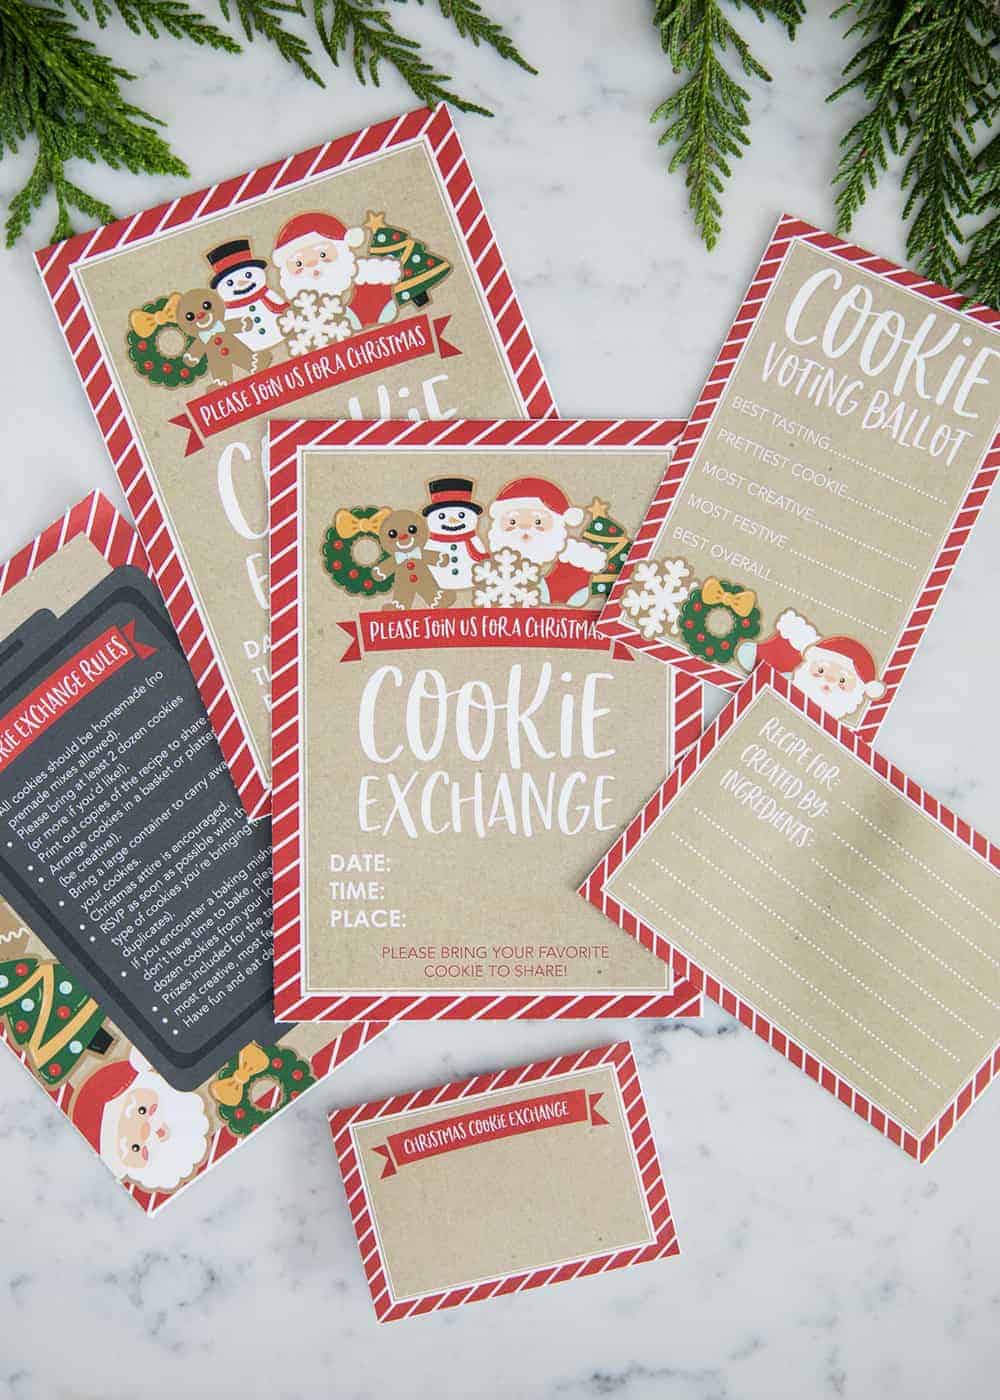 Printed cookie exchange invite and rules.